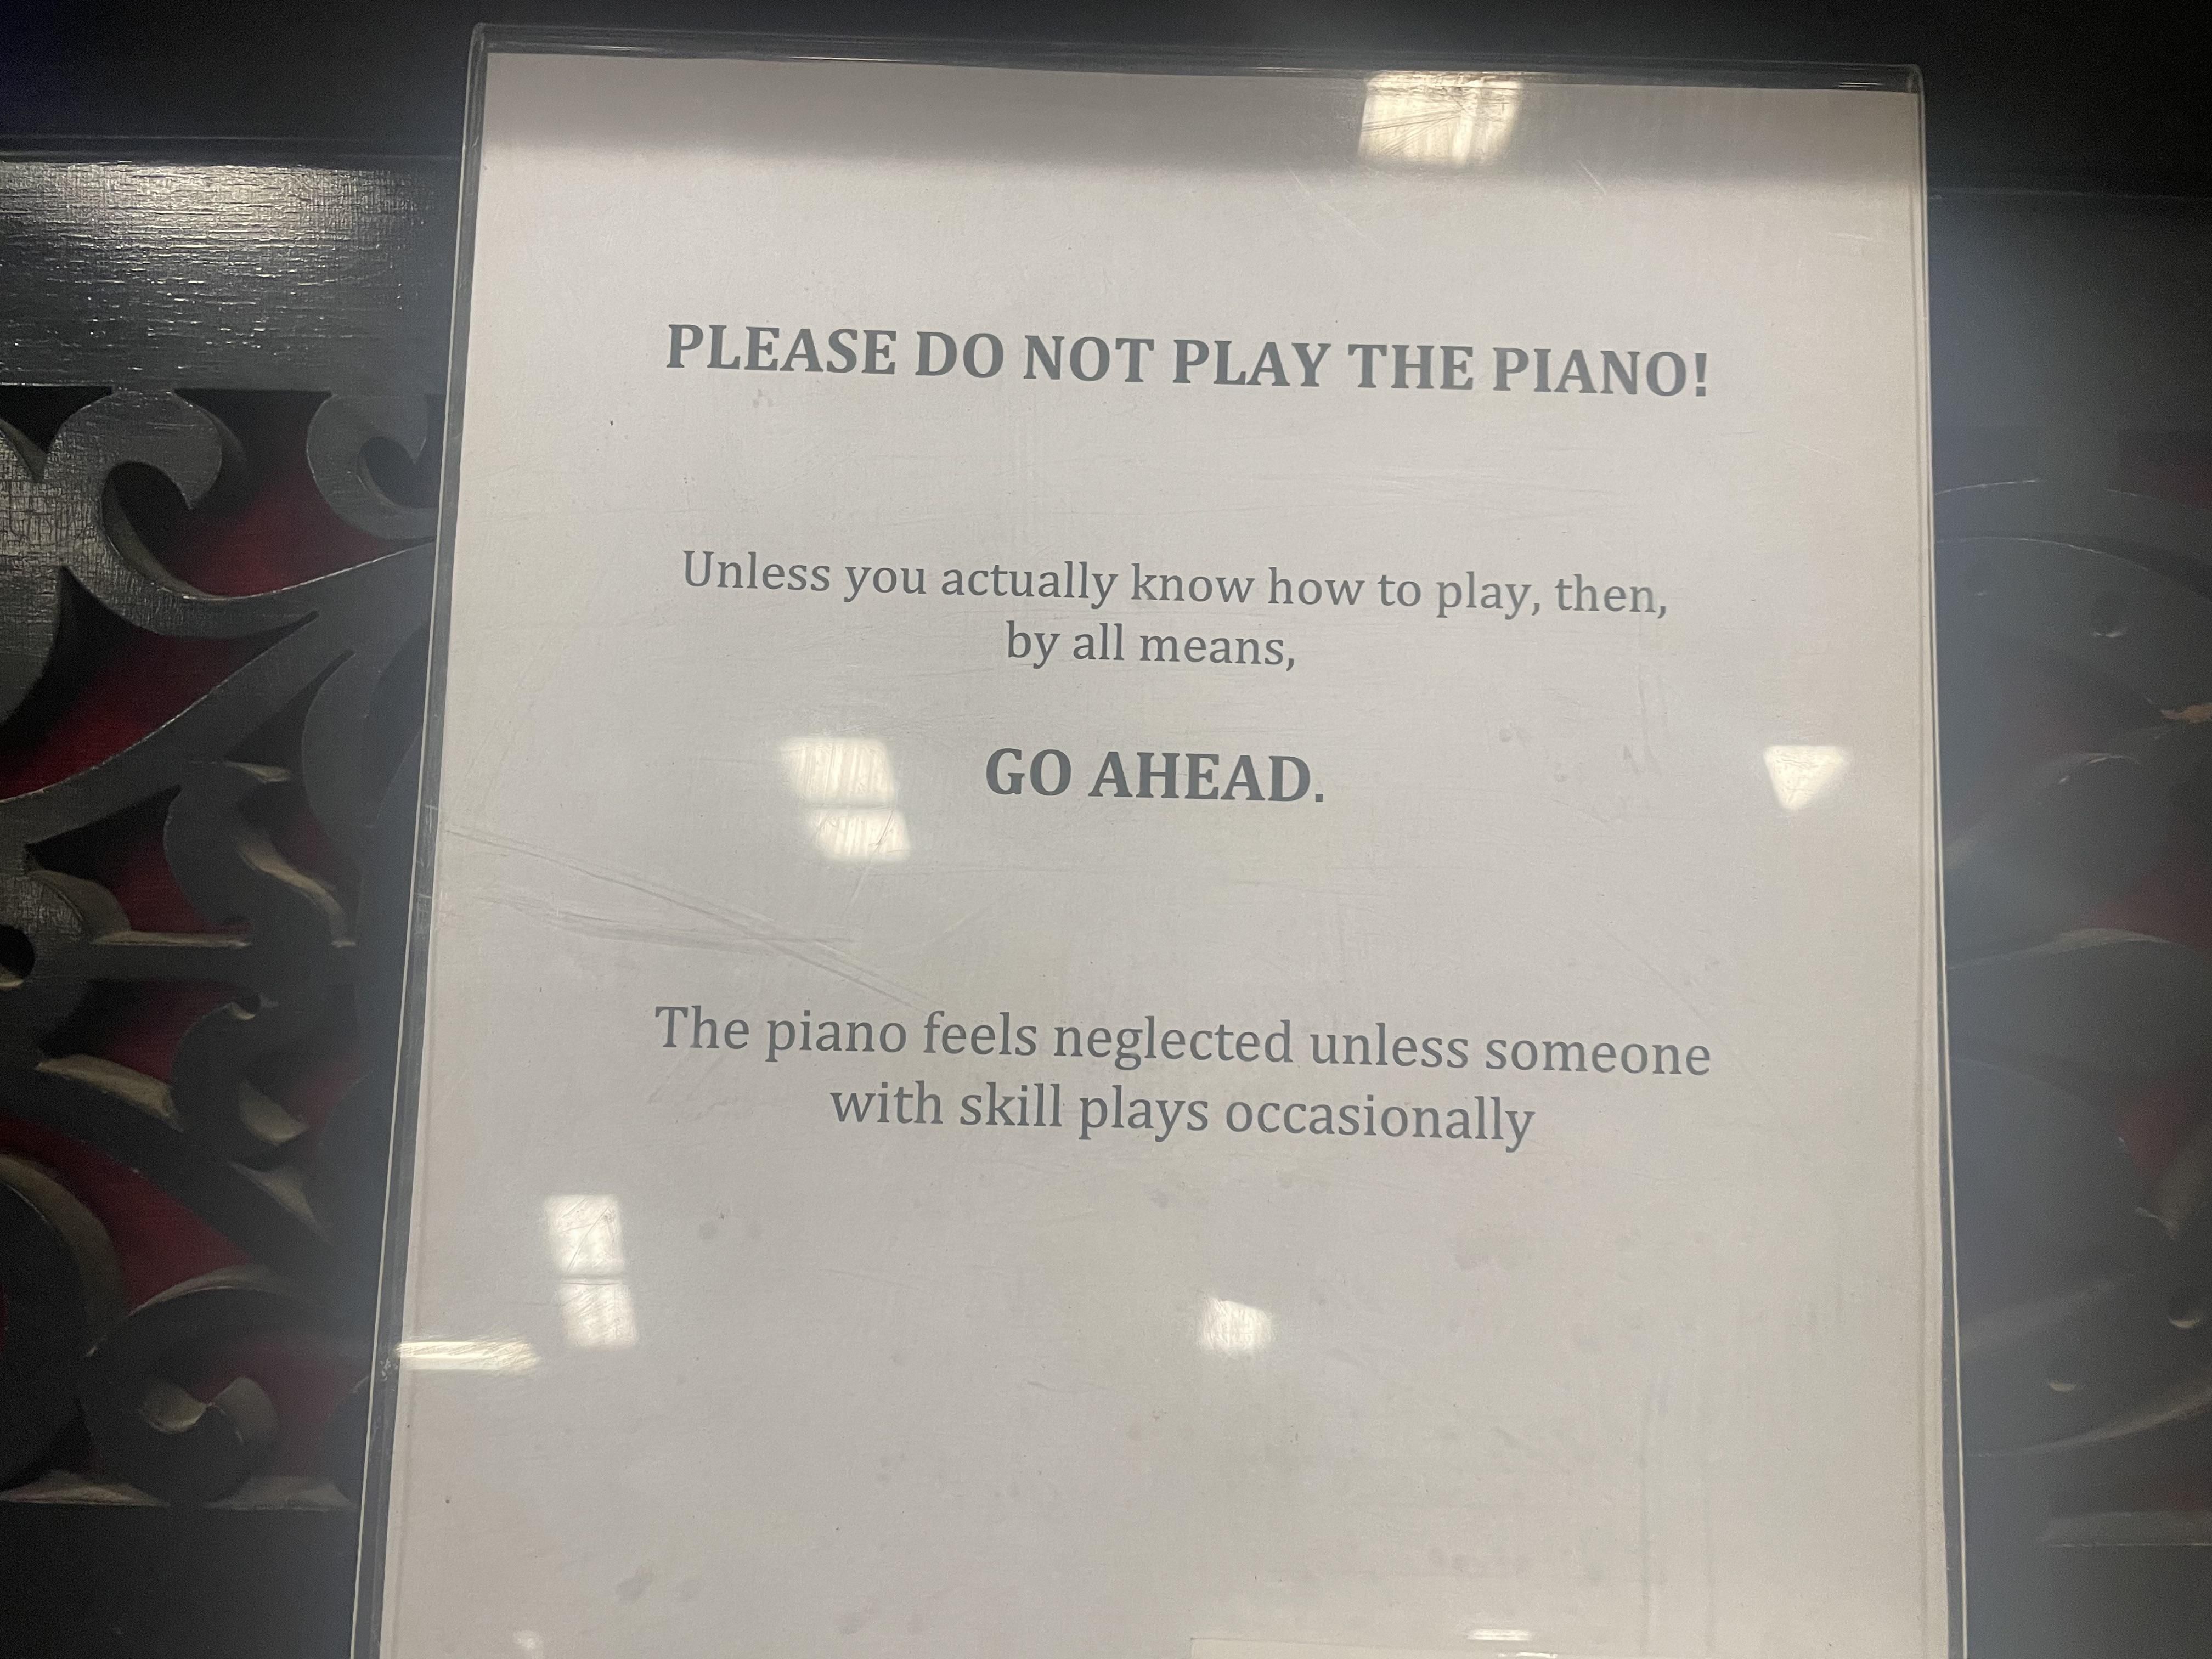 Went to museum and they had a working piano they had this sign